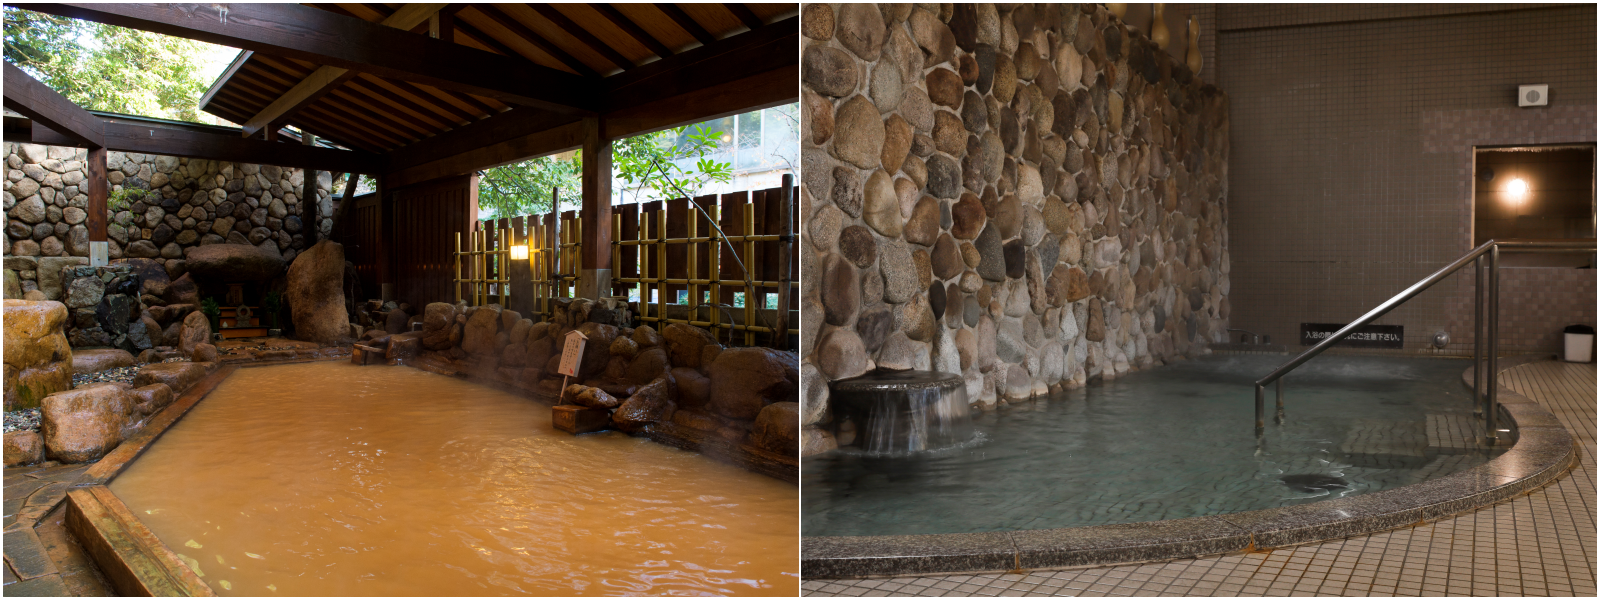 If you visit Osaka or Kyoto, here are the best hot springs in the Kansai area which are close by